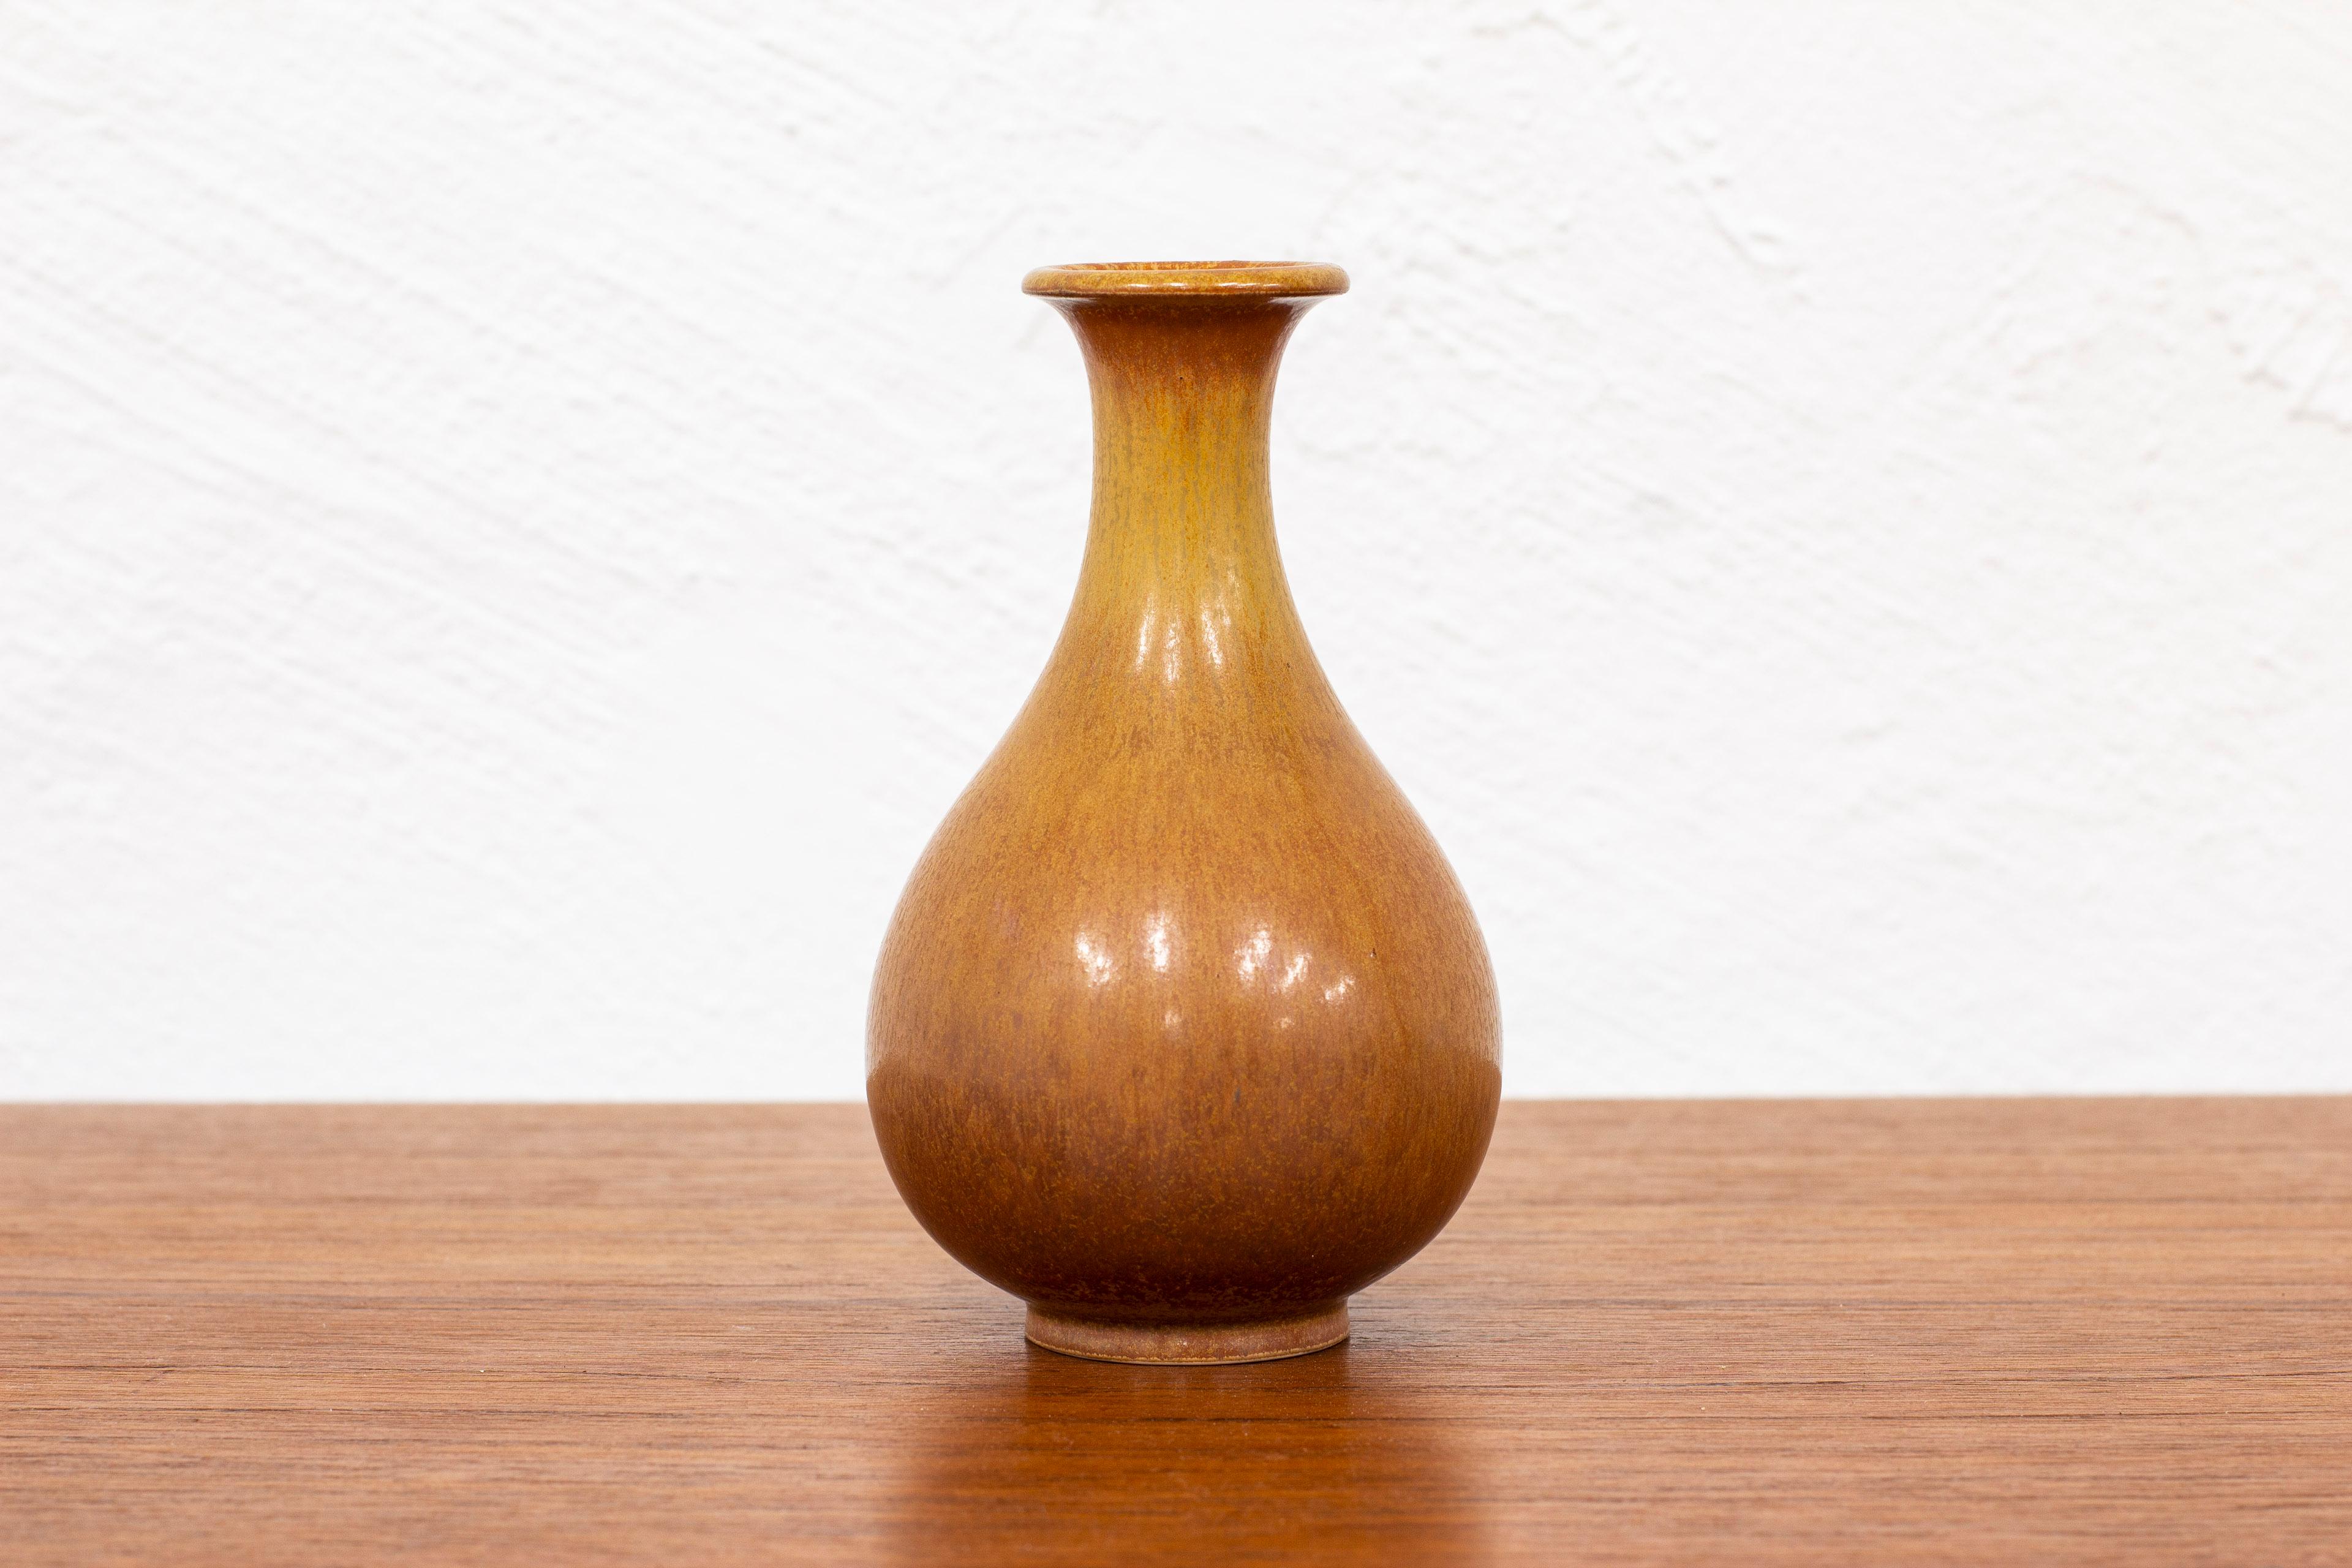 Stoneware vase designed by Gunnar Nylund. Hand made at Rörstrand in the 1940s. Glaze with burnt brown tones. Very good vintage condition with light wear and patina.

Dimensions: H. 14.5 Ø. 9 cm.

